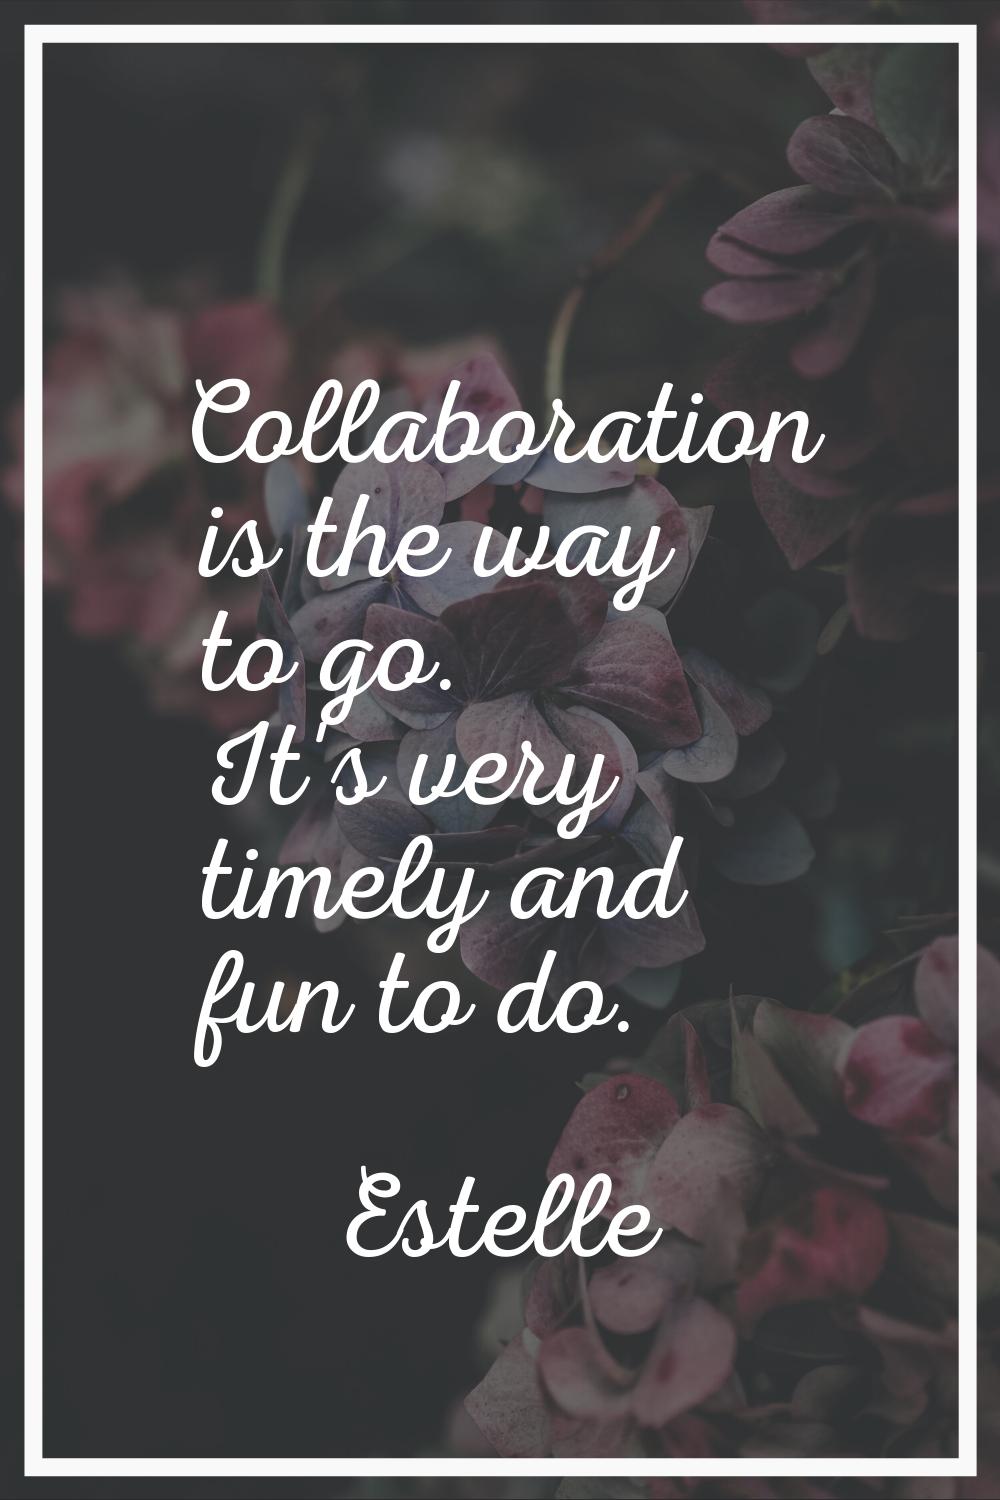 Collaboration is the way to go. It's very timely and fun to do.